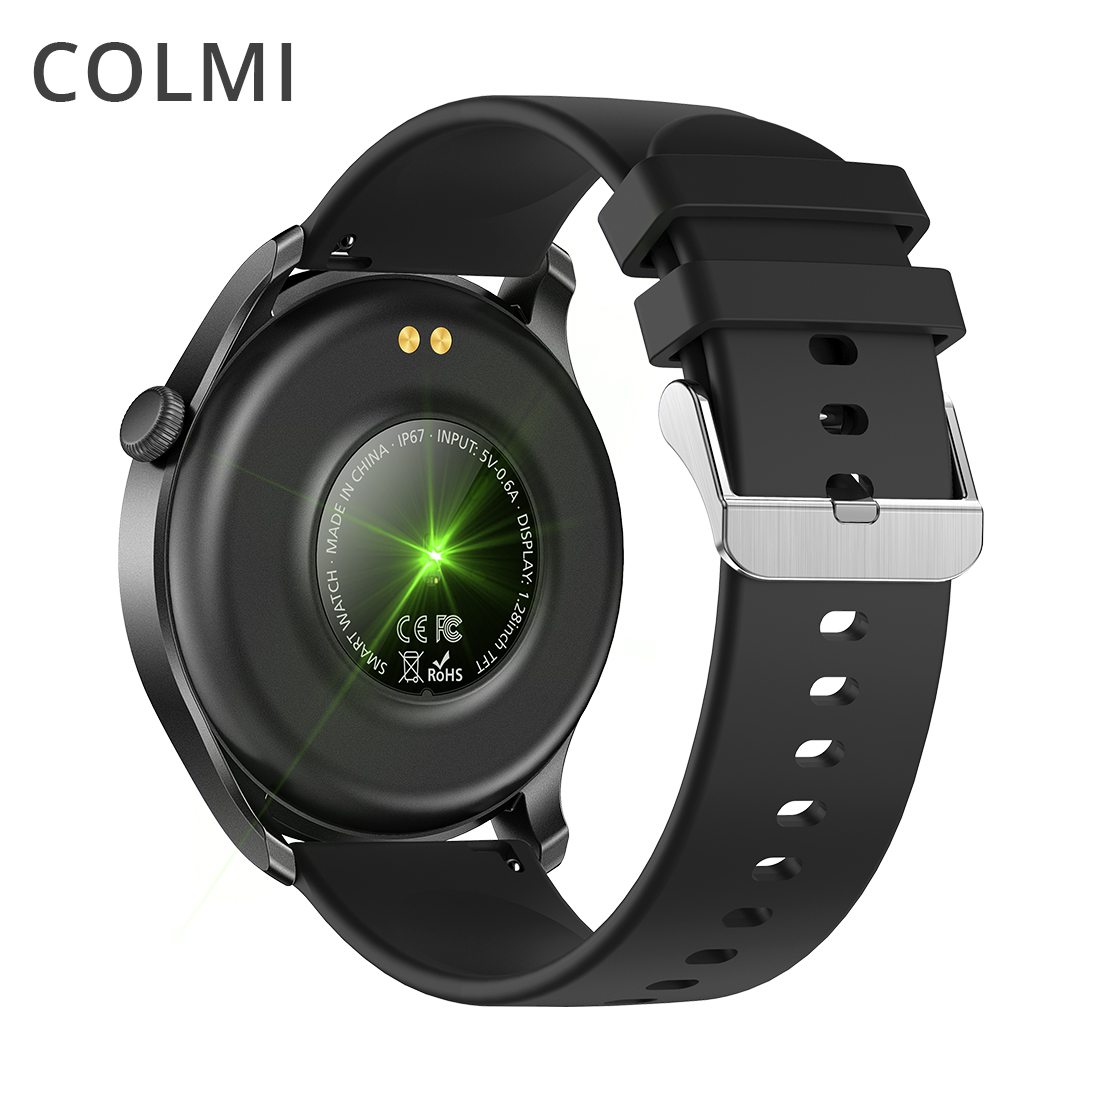 Wholesale Manufacturer of Touch Screen Smart Watches - COLMI SKY 8 Smart  Watch Women IP67 Waterproof Bluetooth Smartwatch Men For Android iOS Phone  – Colmi Manufacturer and Supplier